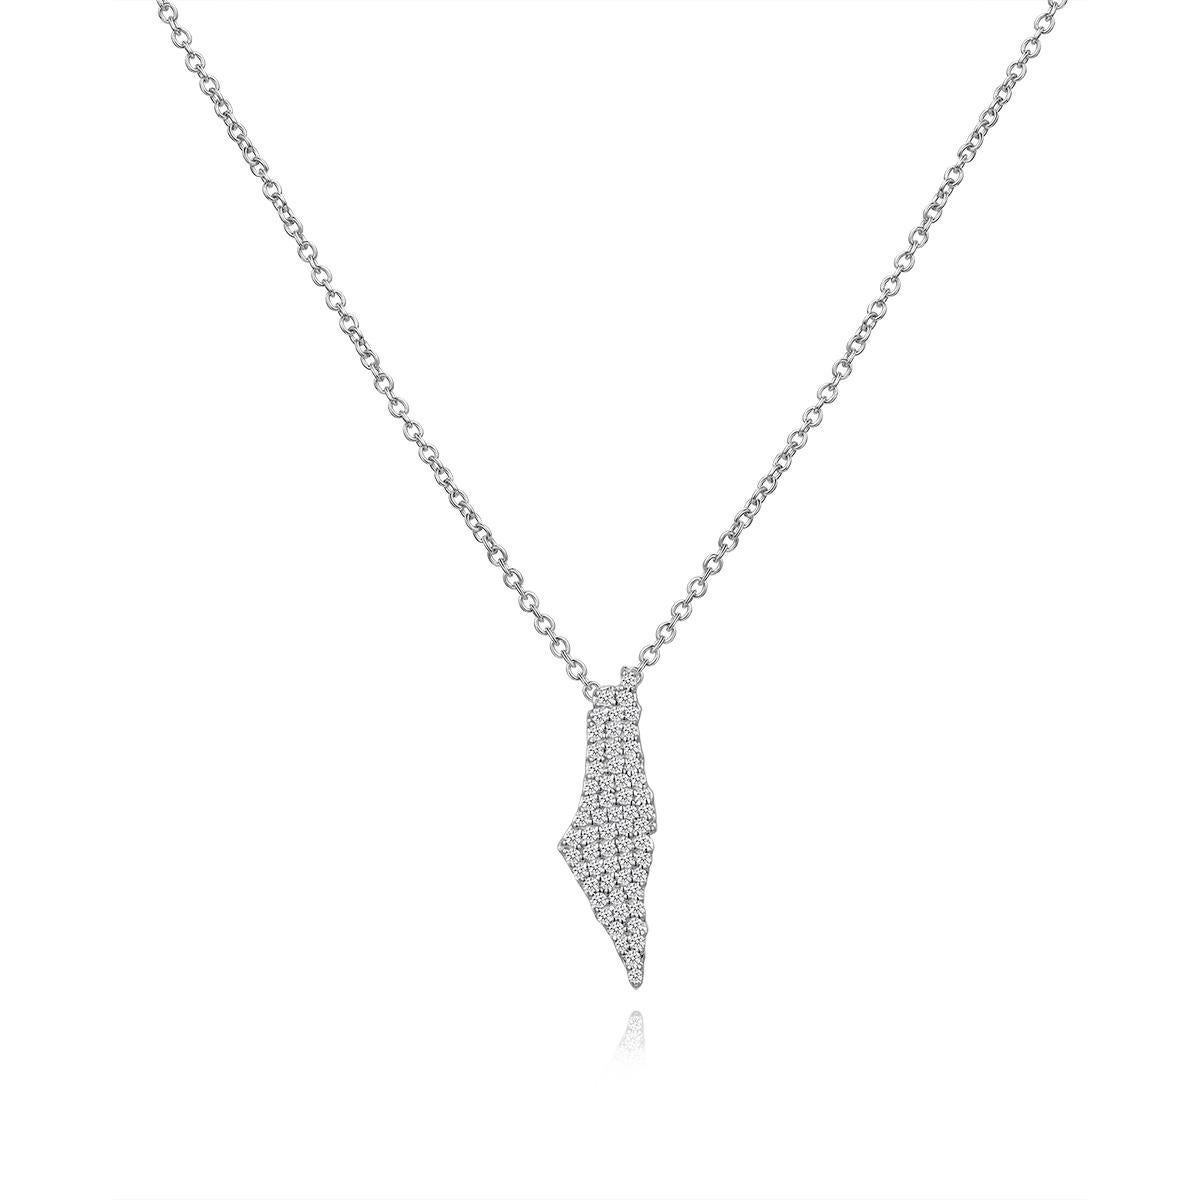 Necklace Information
Diamond Type : Natural Diamond
Metal : 14k
Metal Color : White Gold
Diamond Carat Weight : 0.45ttcw
Diamond Color-Clarity : G-SI
Diameter : 6.5x19.5mm
Lead Time : 4-8 Weeks (If out of Stock)
 

JEWELRY CARE
Over the course of